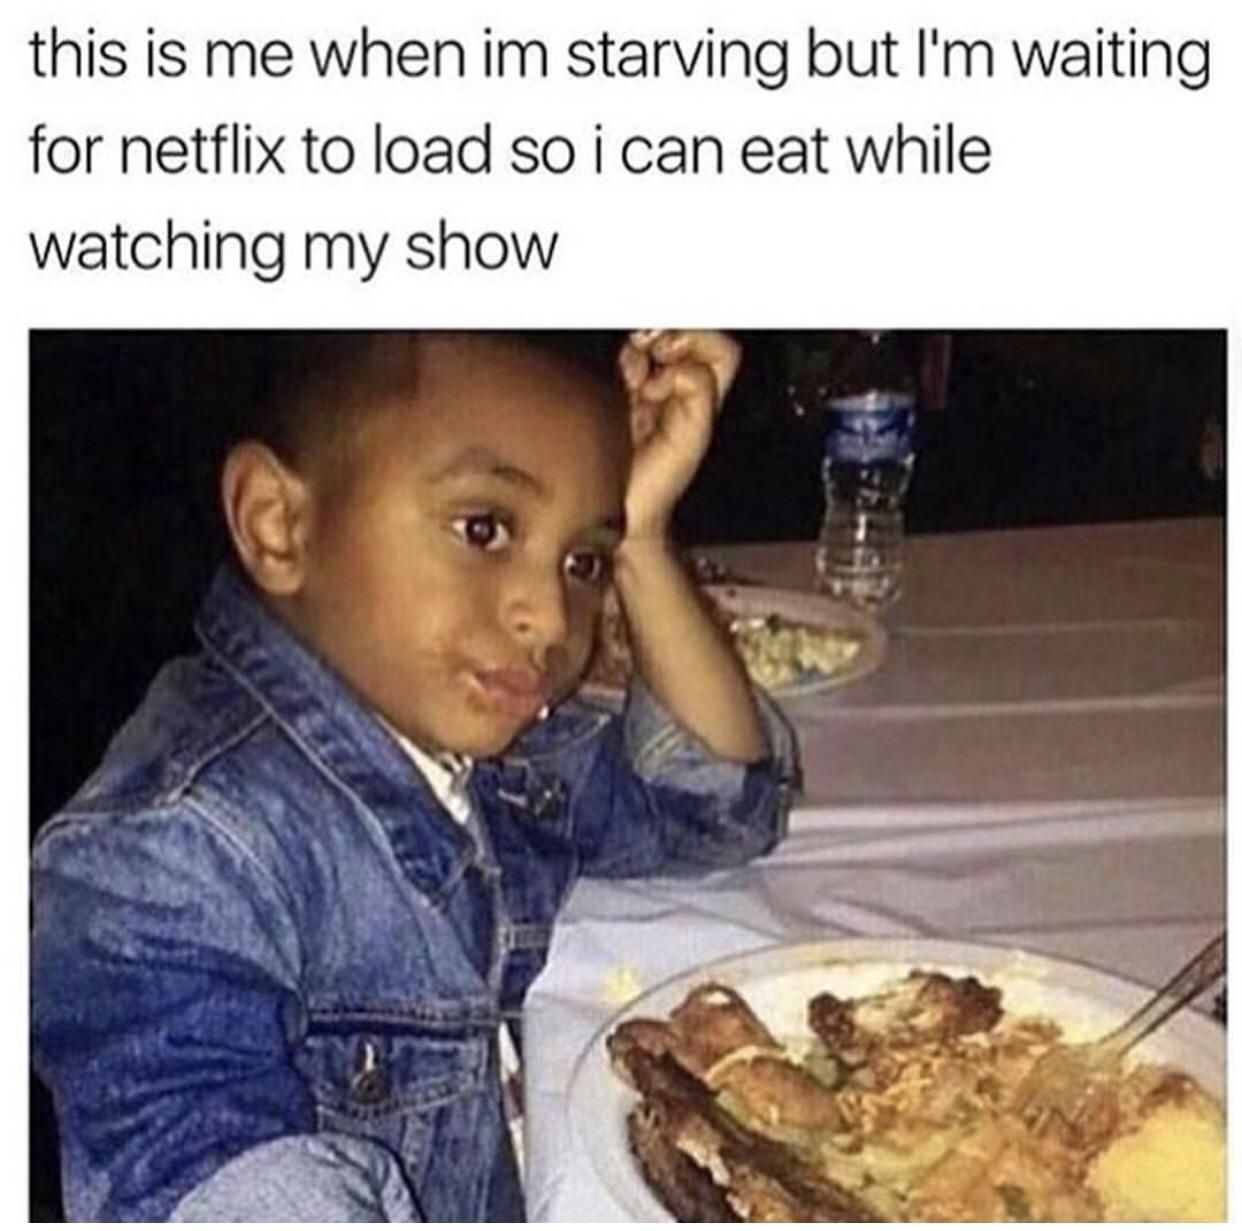 The struggles of Netflix and food